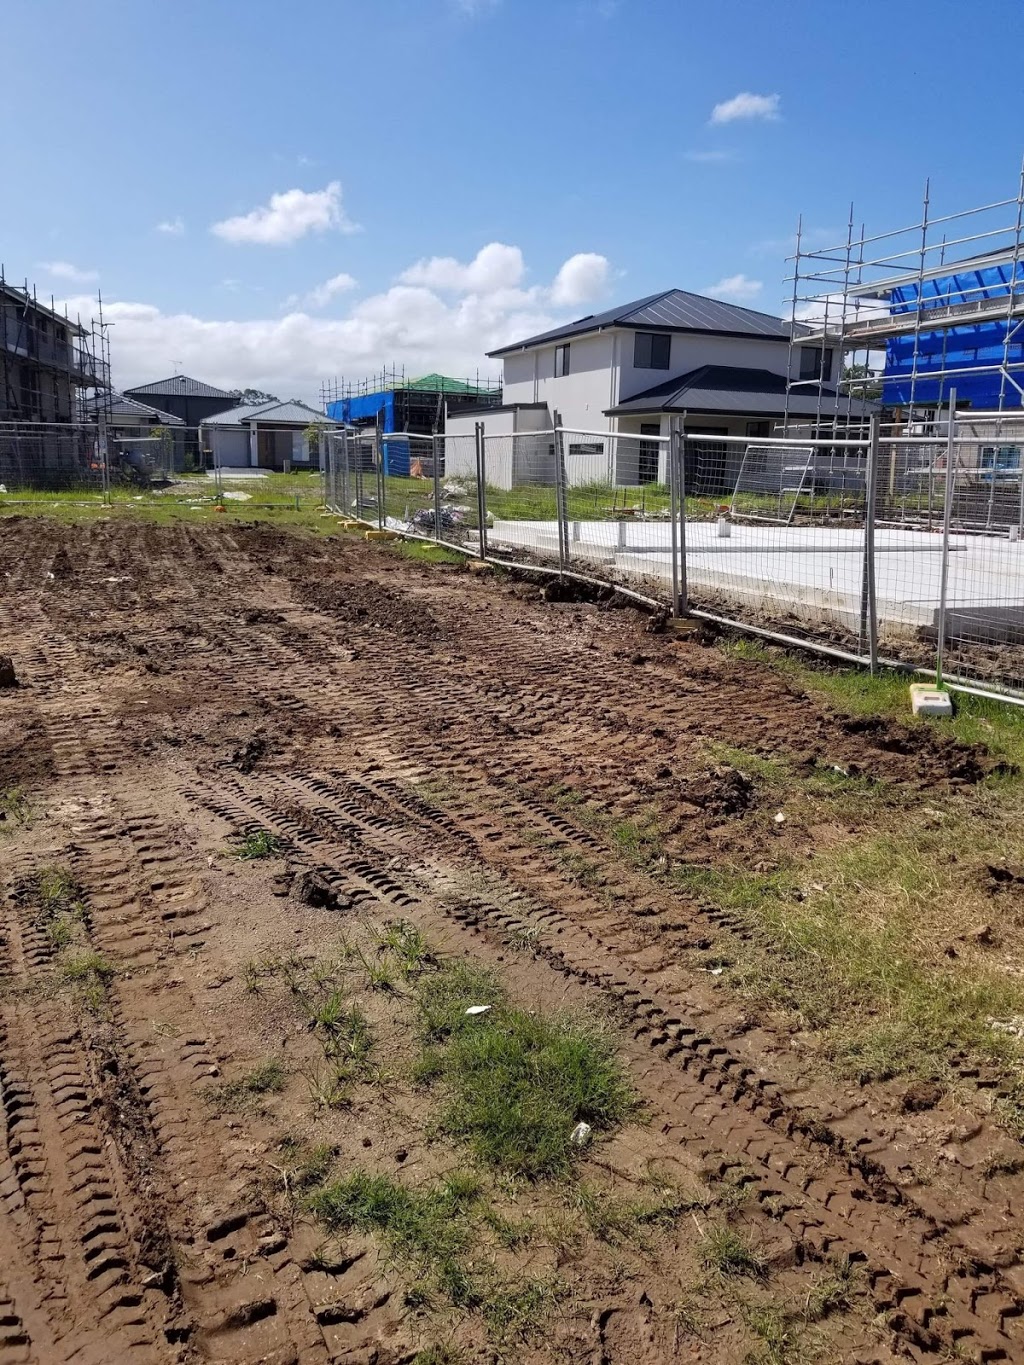 ONTRACK Earthmoving & Demolition | general contractor | Kerry Rd, Schofields NSW 2762, Australia | 0405434348 OR +61 405 434 348